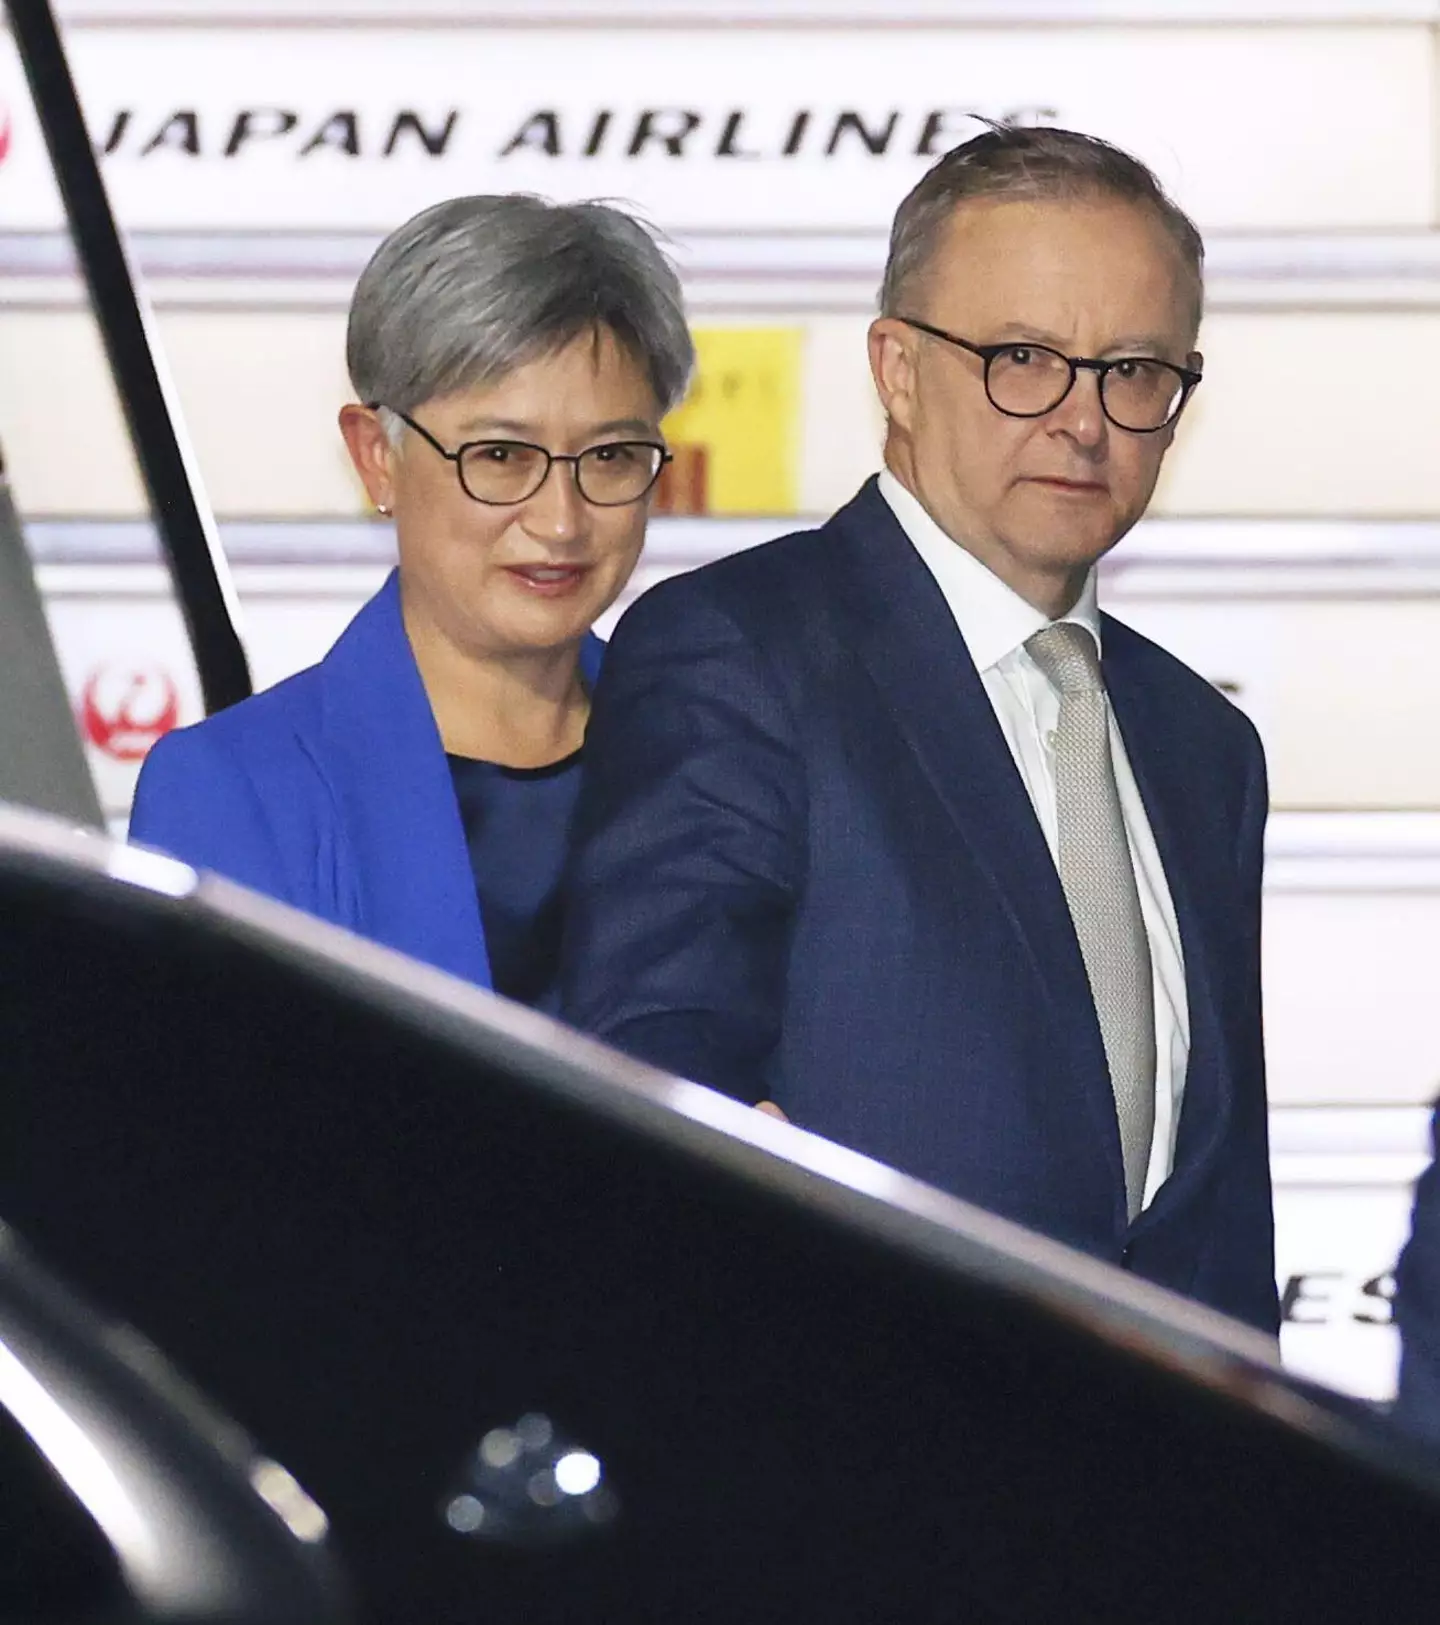 Anthony Albanese jetted off to Japan shortly after being sworn in.